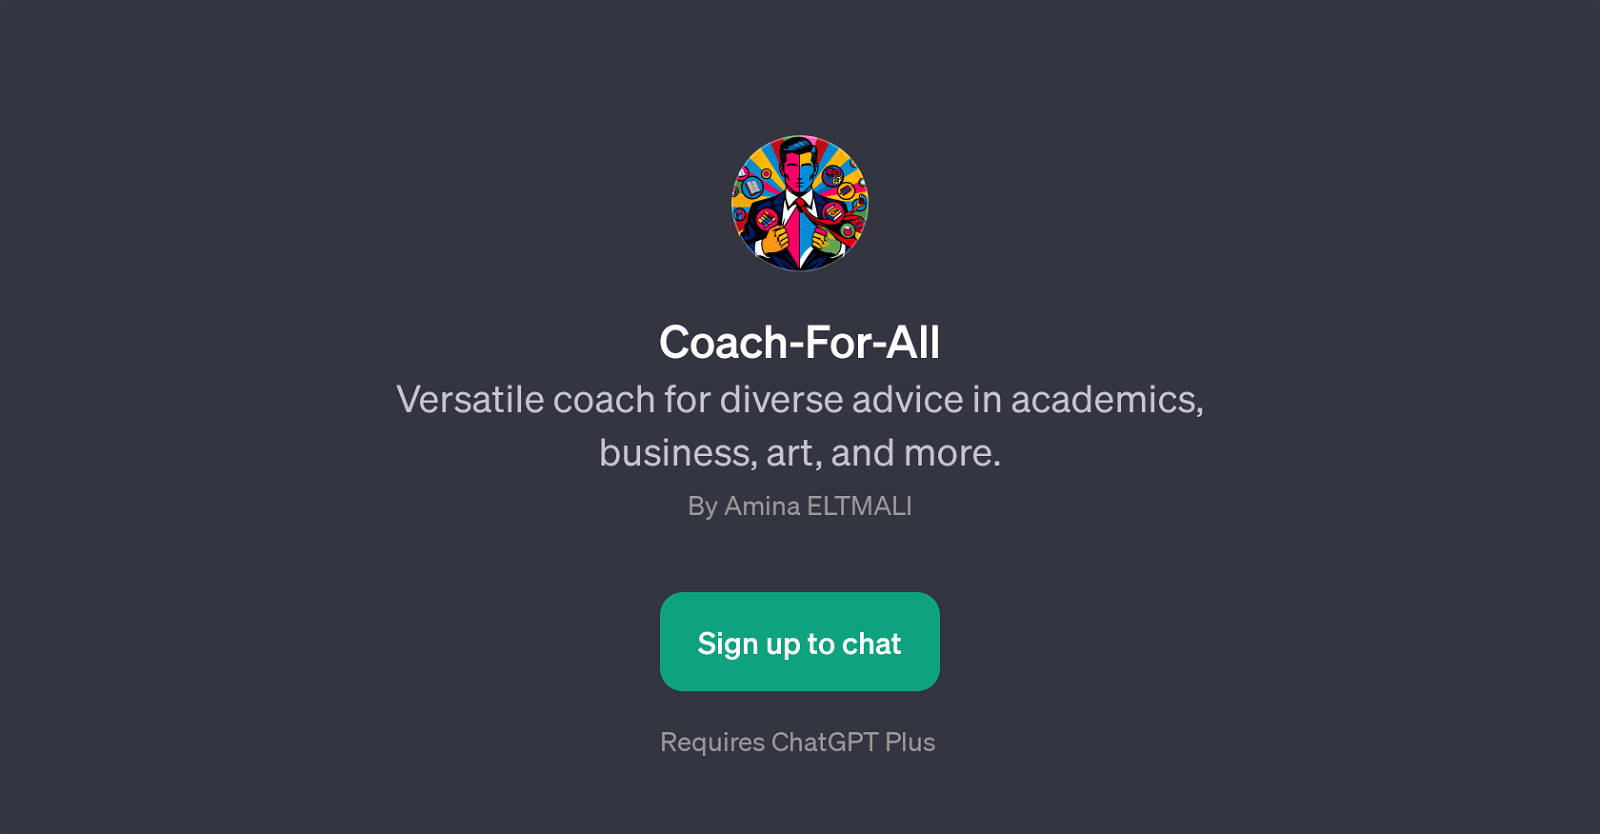 Coach-For-All website